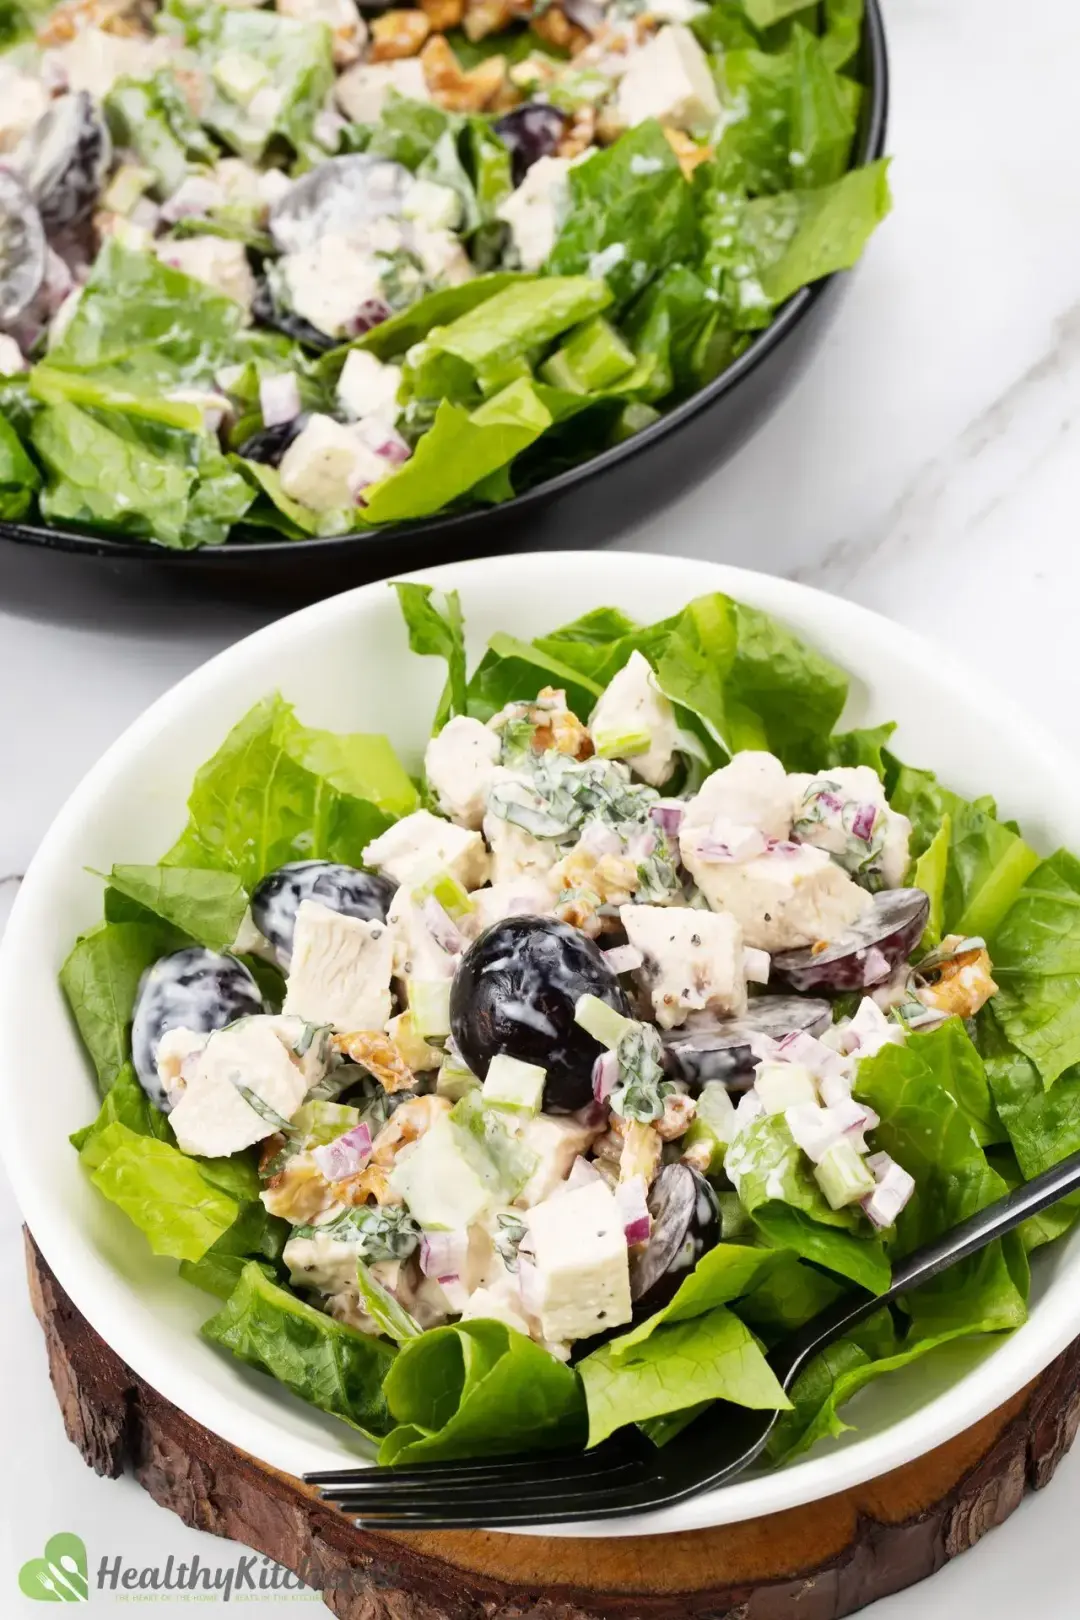 Two plates of waldorf chicken salad with chopped fruits, celery, halved grapes, and romaine lettuce with a black fork